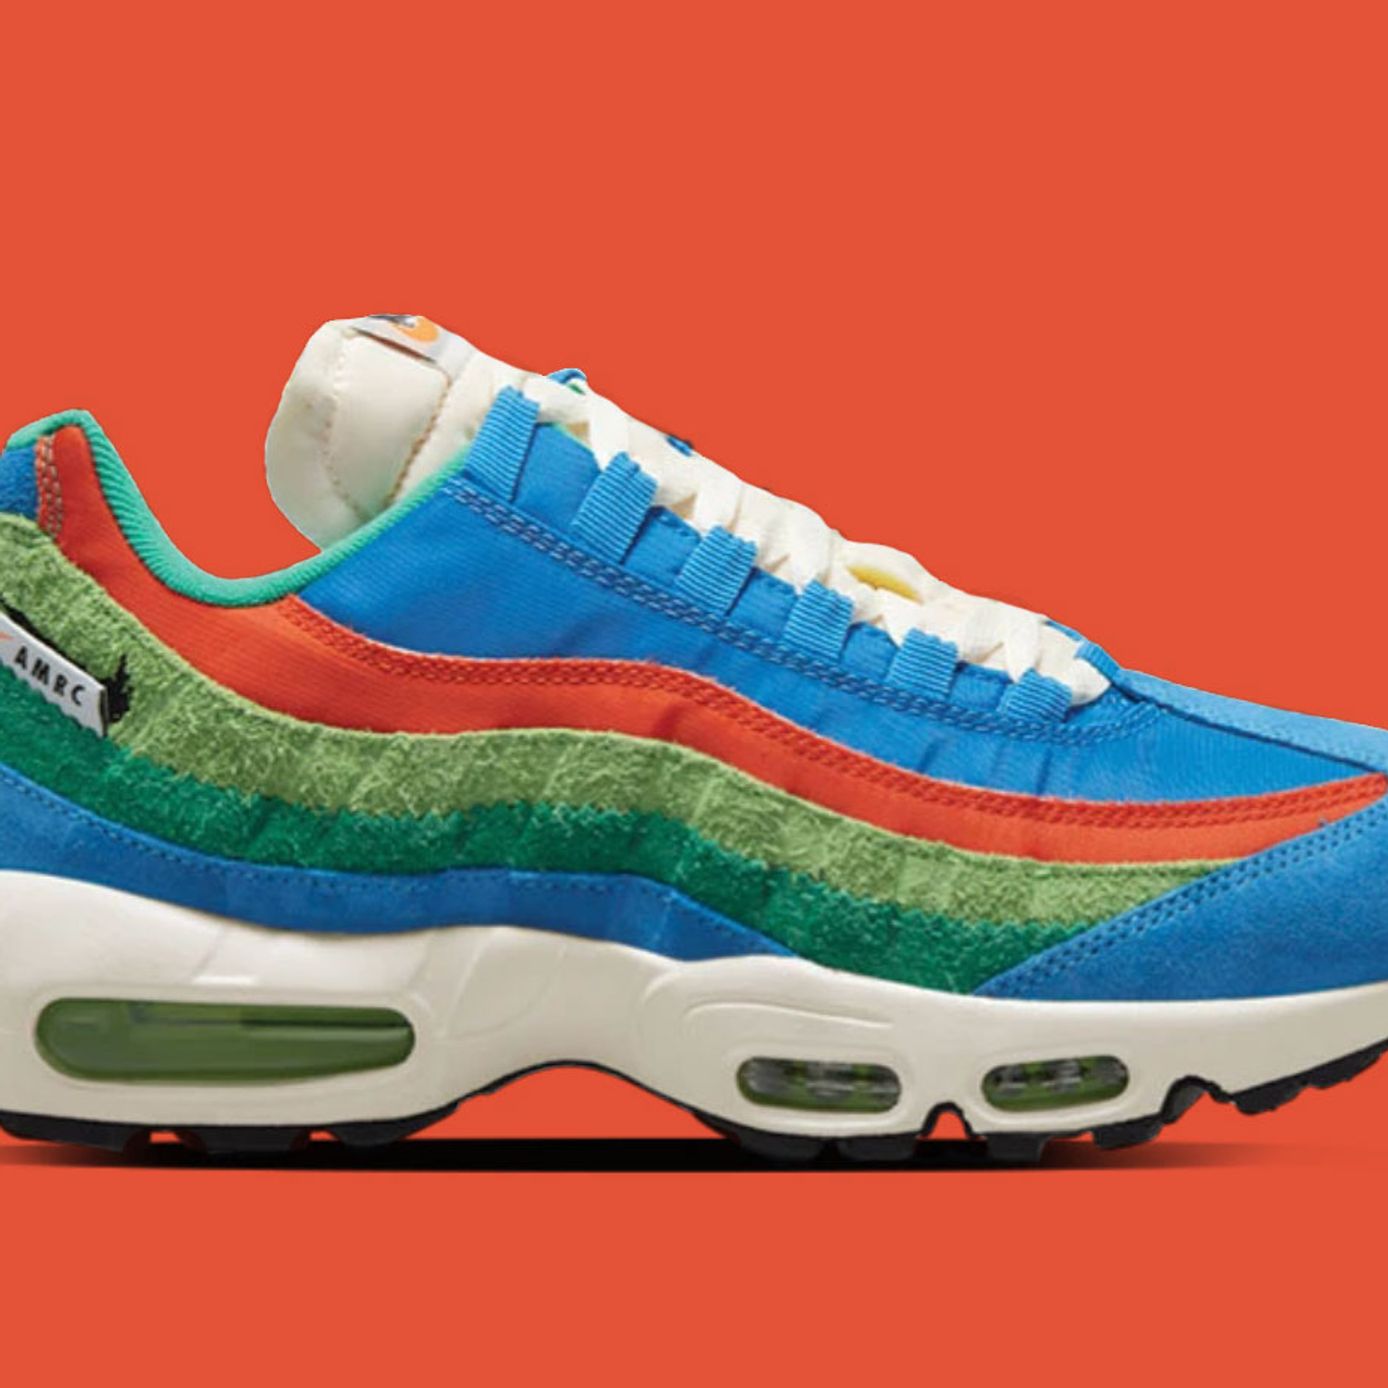 Join the Running Club with Nike Air Max 95 - Sneaker Freaker